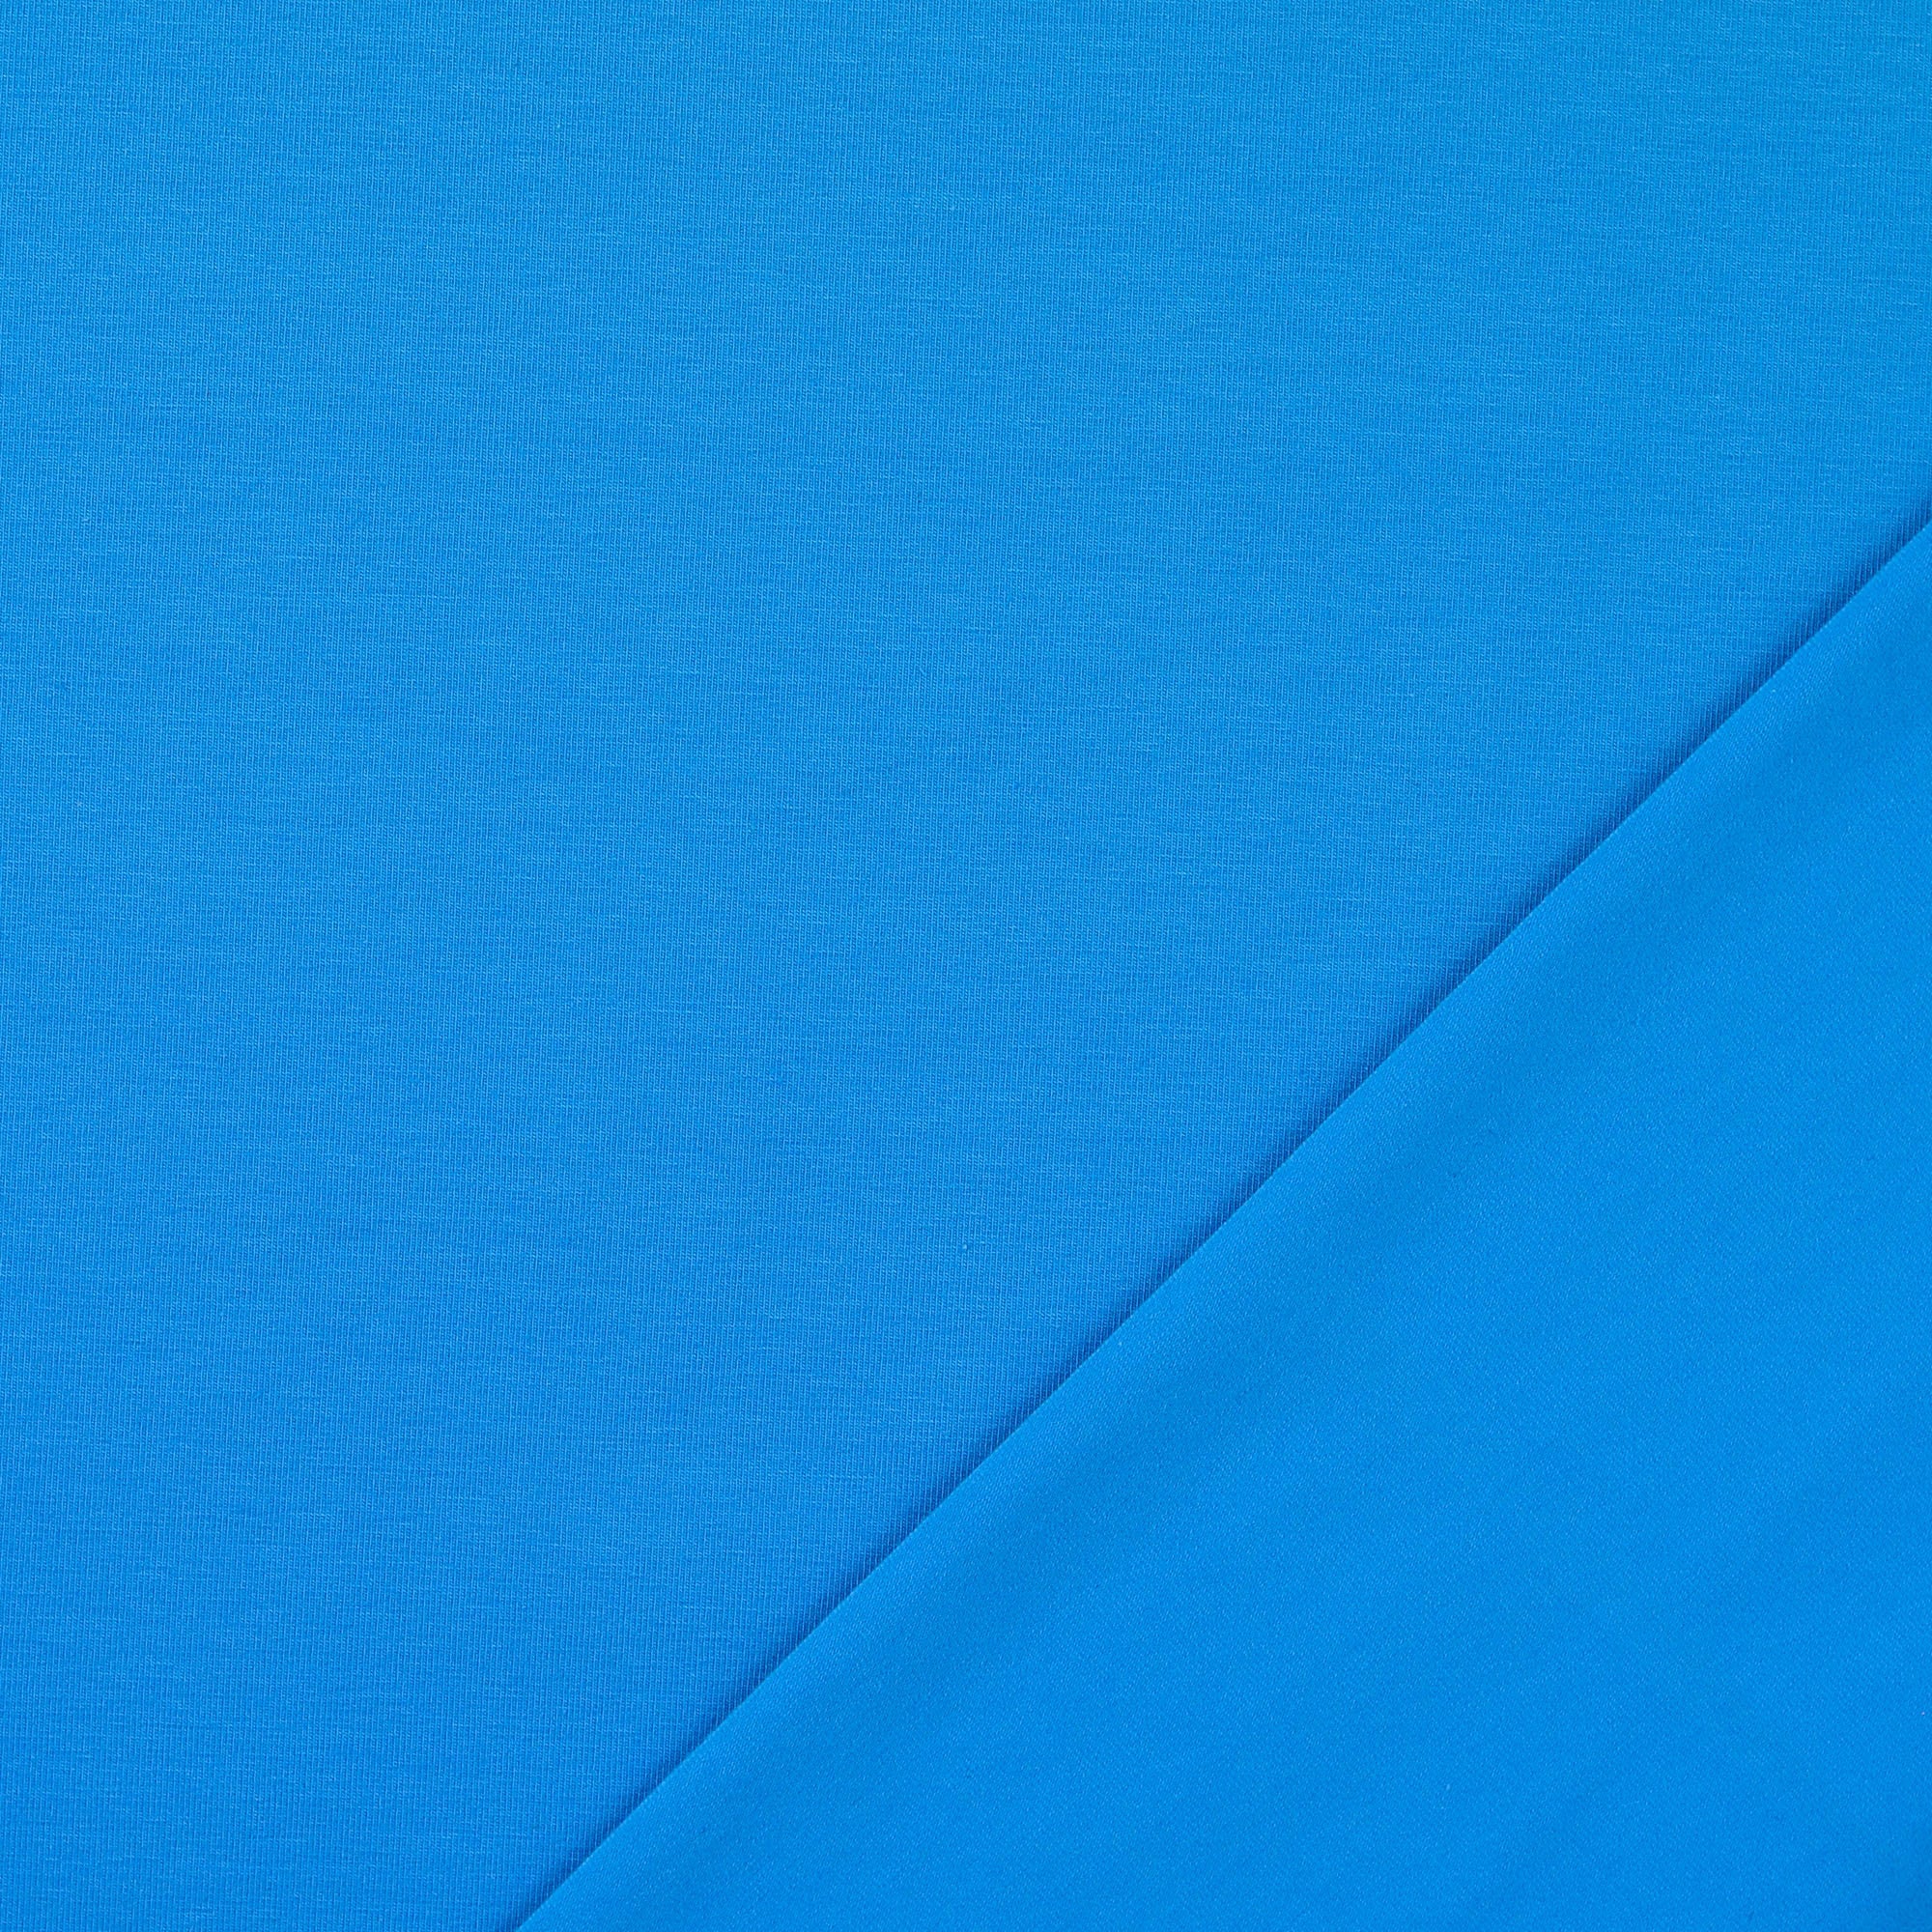 REMNANT 0.9 Metres - Essential Chic Turquoise Blue Plain Cotton Jersey Fabric